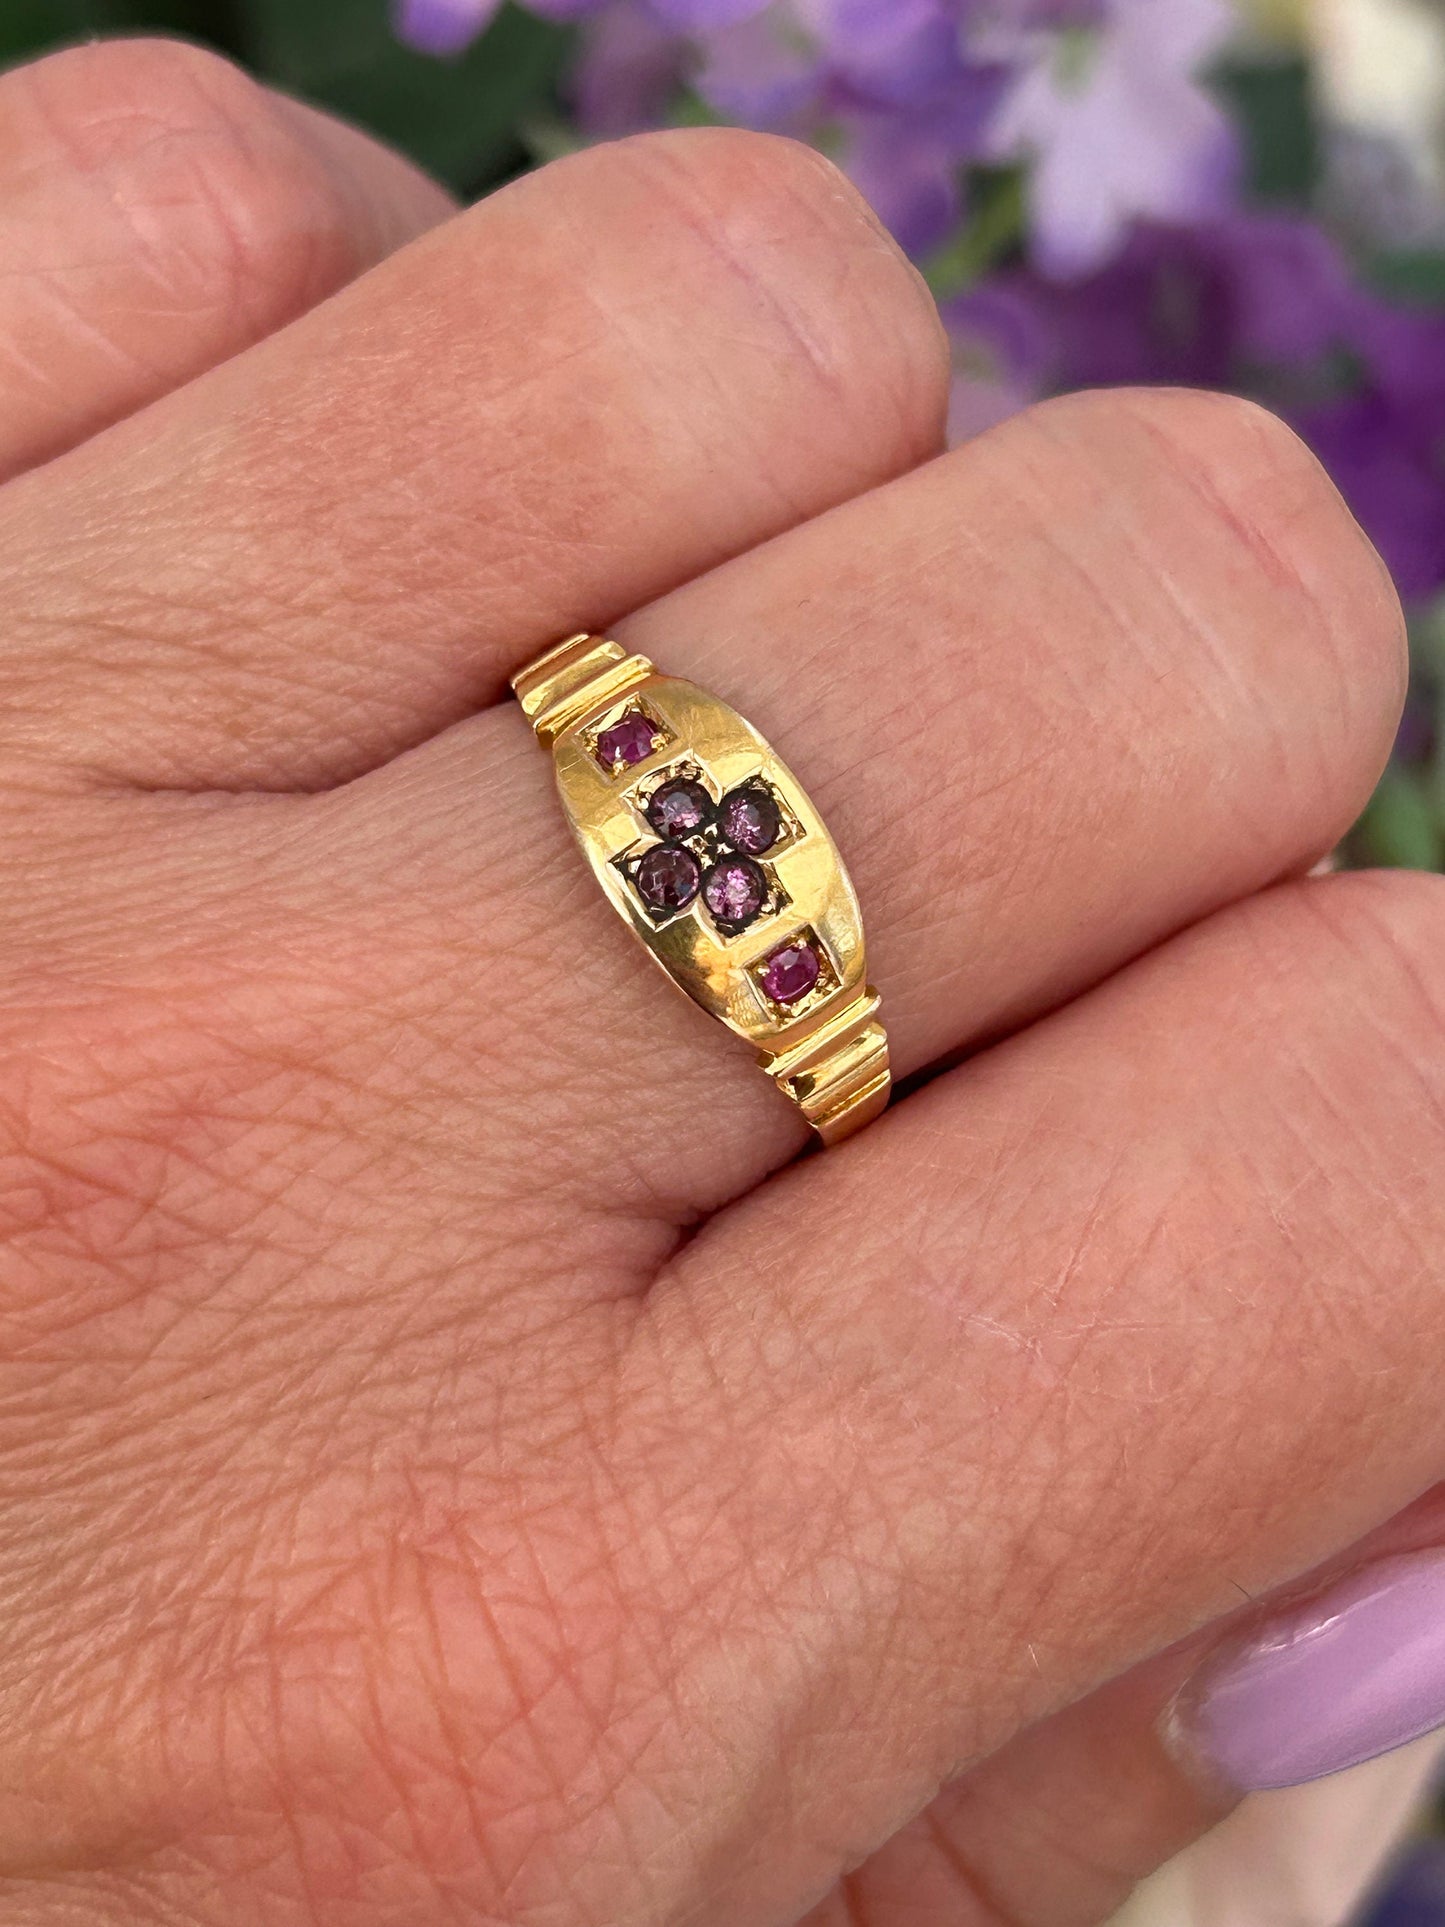 Antique Victorian Amethyst and Ruby Gypsy Ring 15 Carat Yellow Gold 1882